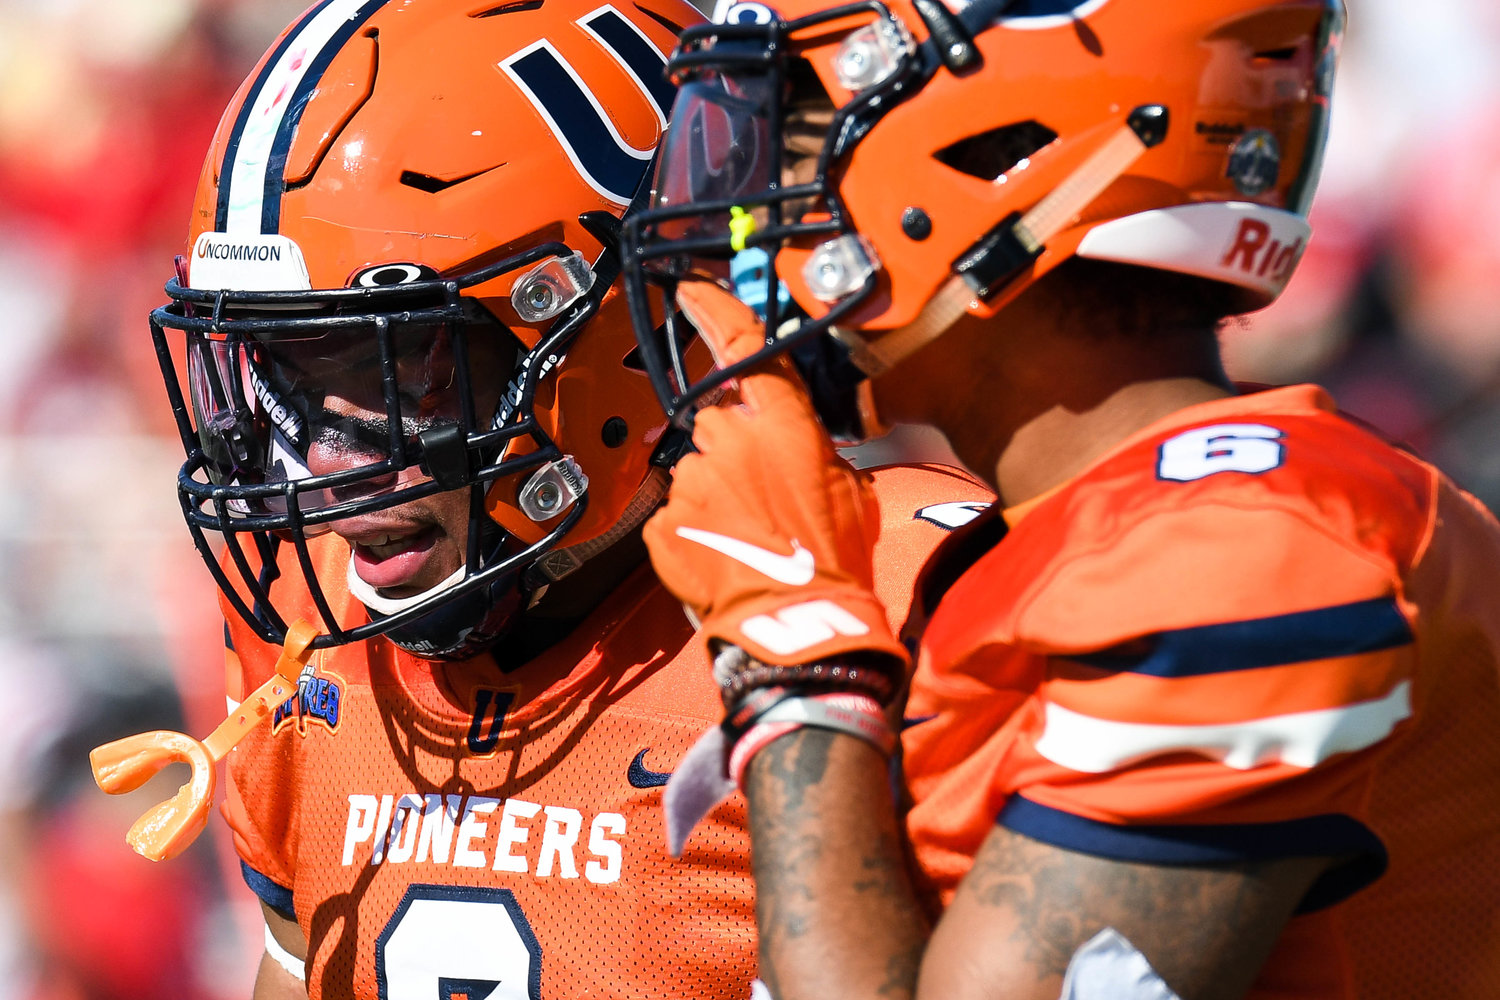 Utica Pioneers players Darius Johnson and Cameron Davis talk after a play during the Empire 8 game against SUNY Cortland on Saturday afternoon at Charles A. Gaetano Stadium in Utica.